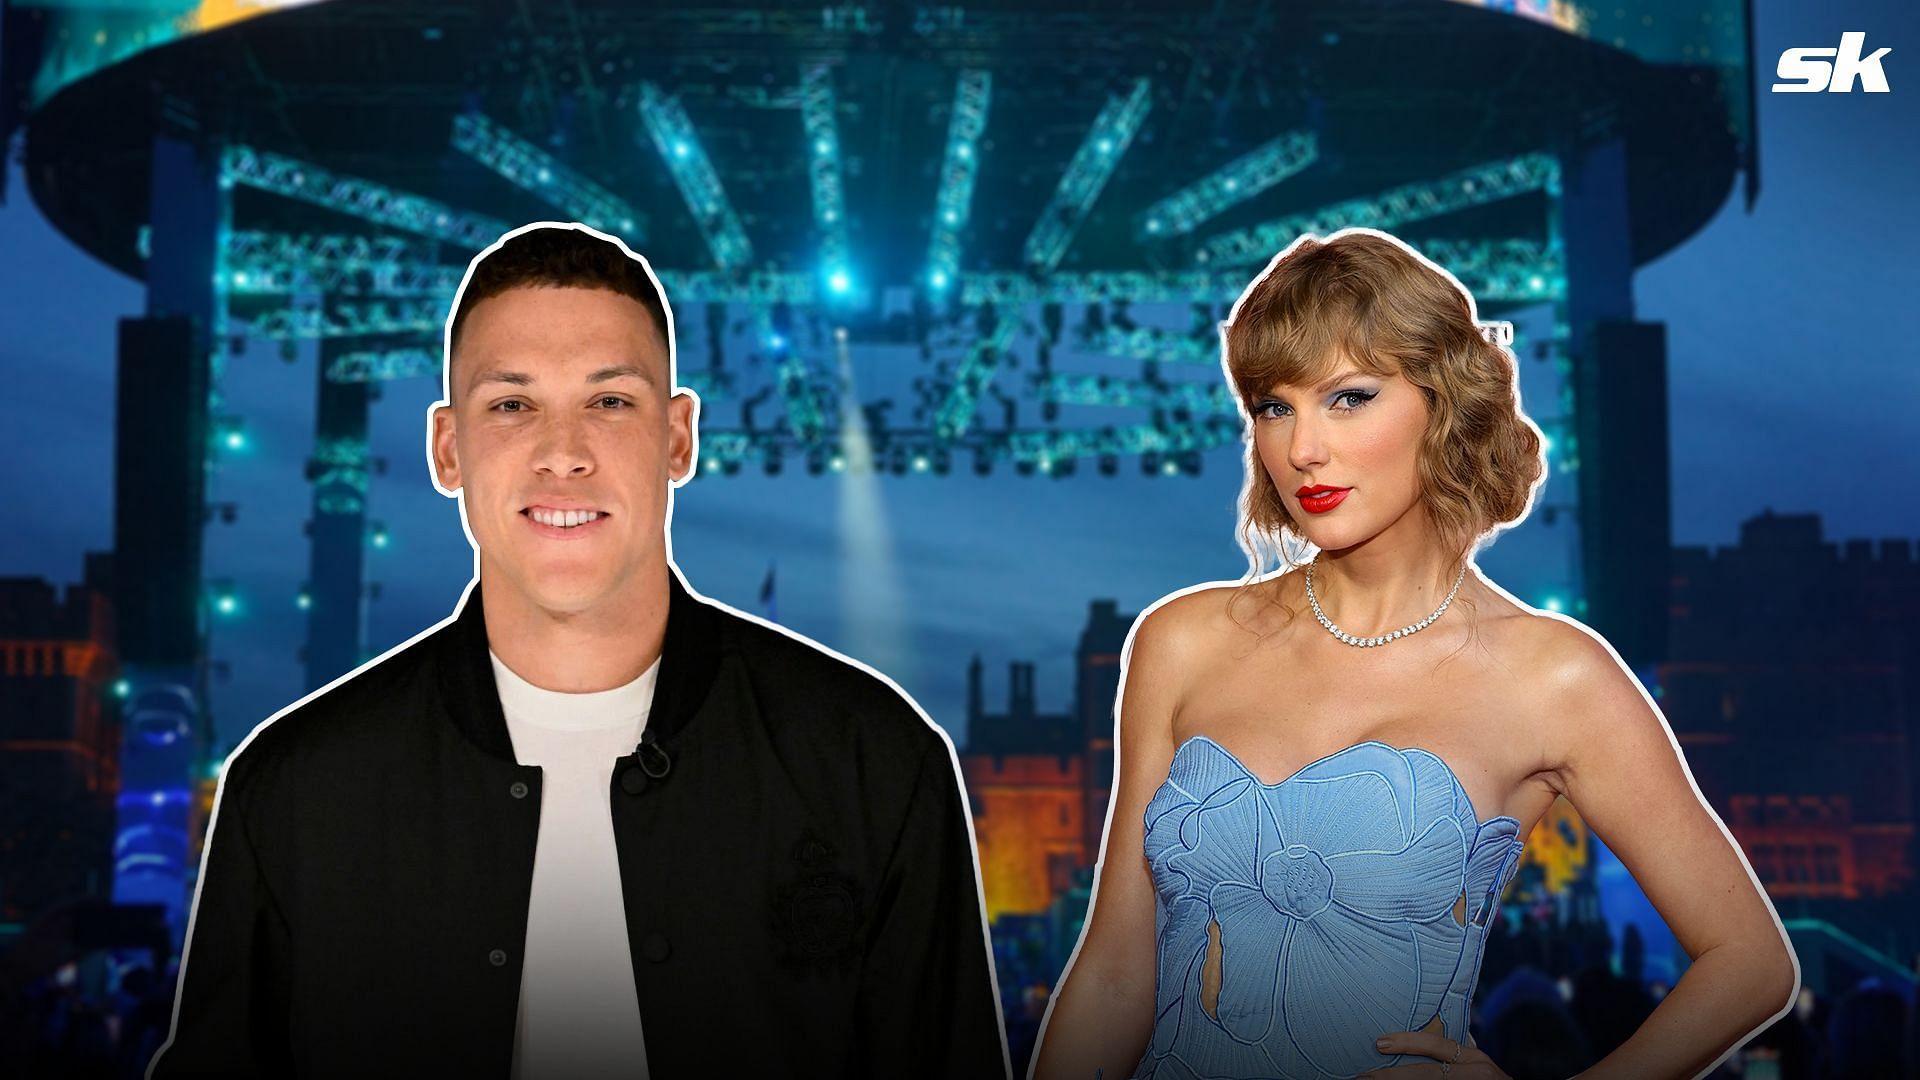 Yankees superstar Aaron Judge on the fence about Taylor Swift